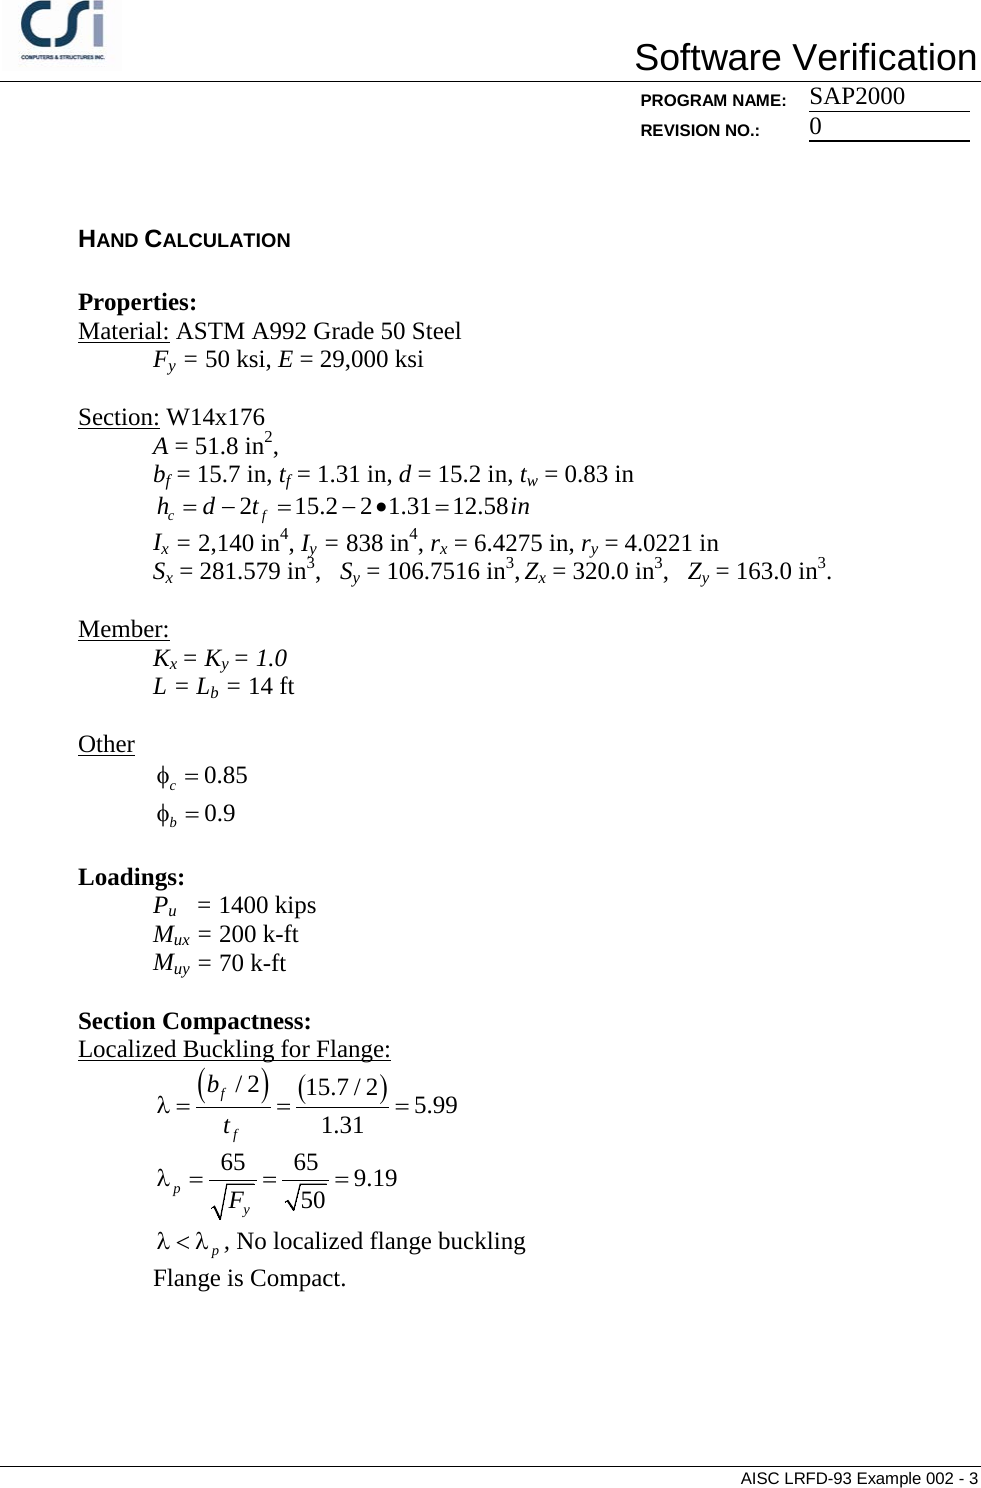 Page 3 of 7 - Contents AISC LRFD-93 Example 002